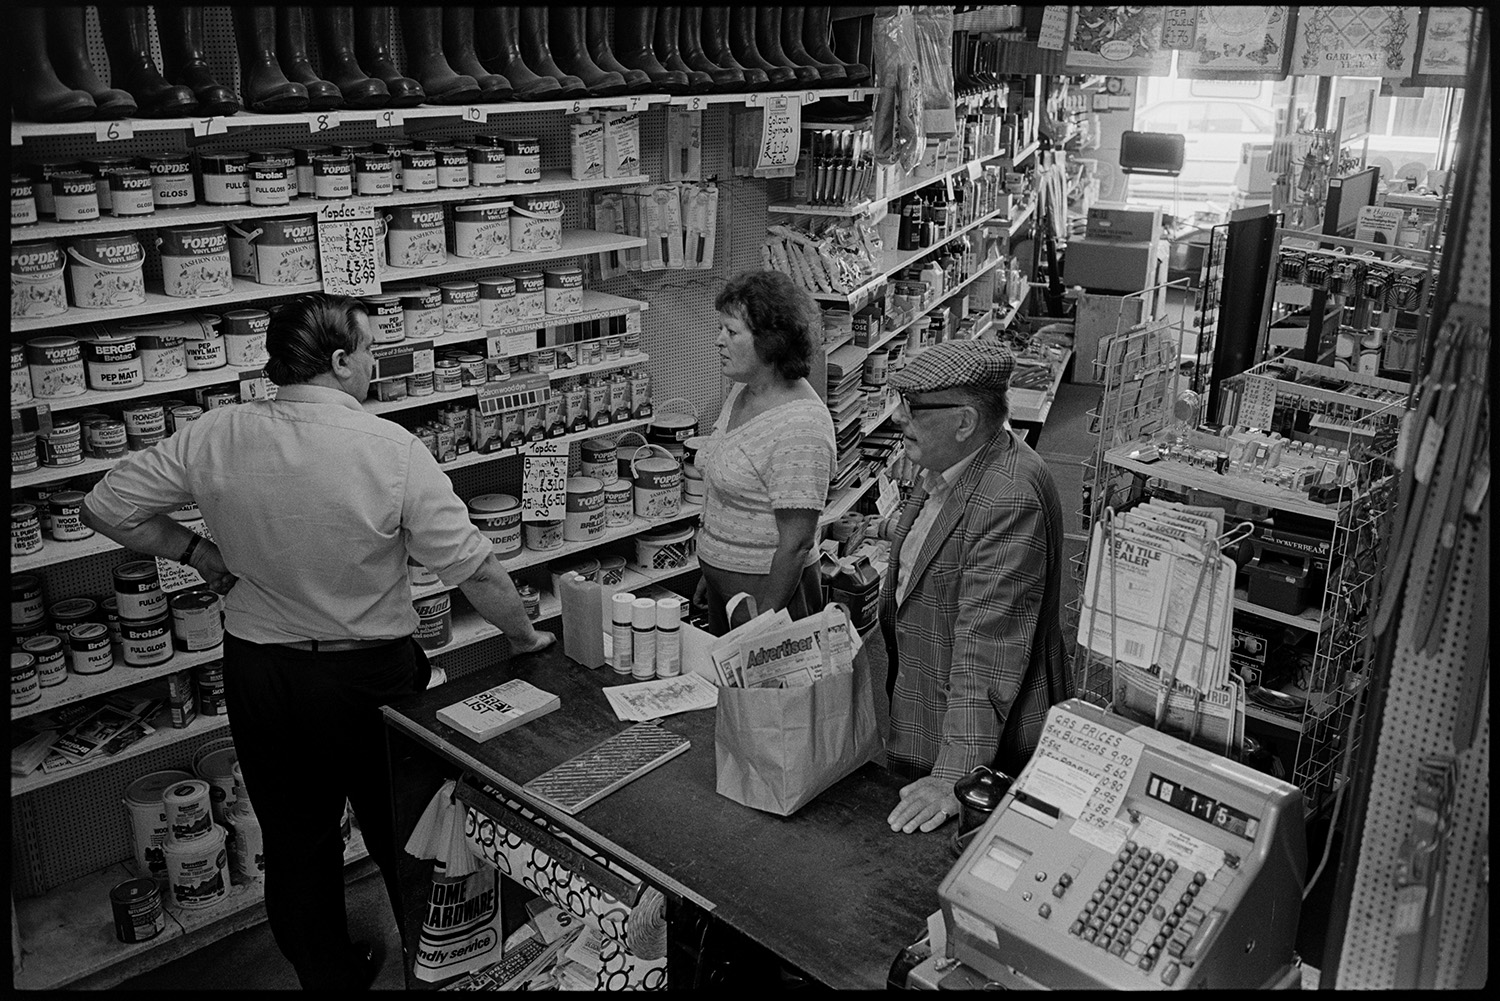 Interior of ironmongers shop. Assistant serving customer. Goods on shelves. Hardware.<br />
[A view of Alec Brownscombe serving customers at the counter of A E Kingdon ironmongers shop at Chulmleigh. Shelves are stocked with paint tins, Wellington boots and various other goods. The till can be seen on the shop counter.]